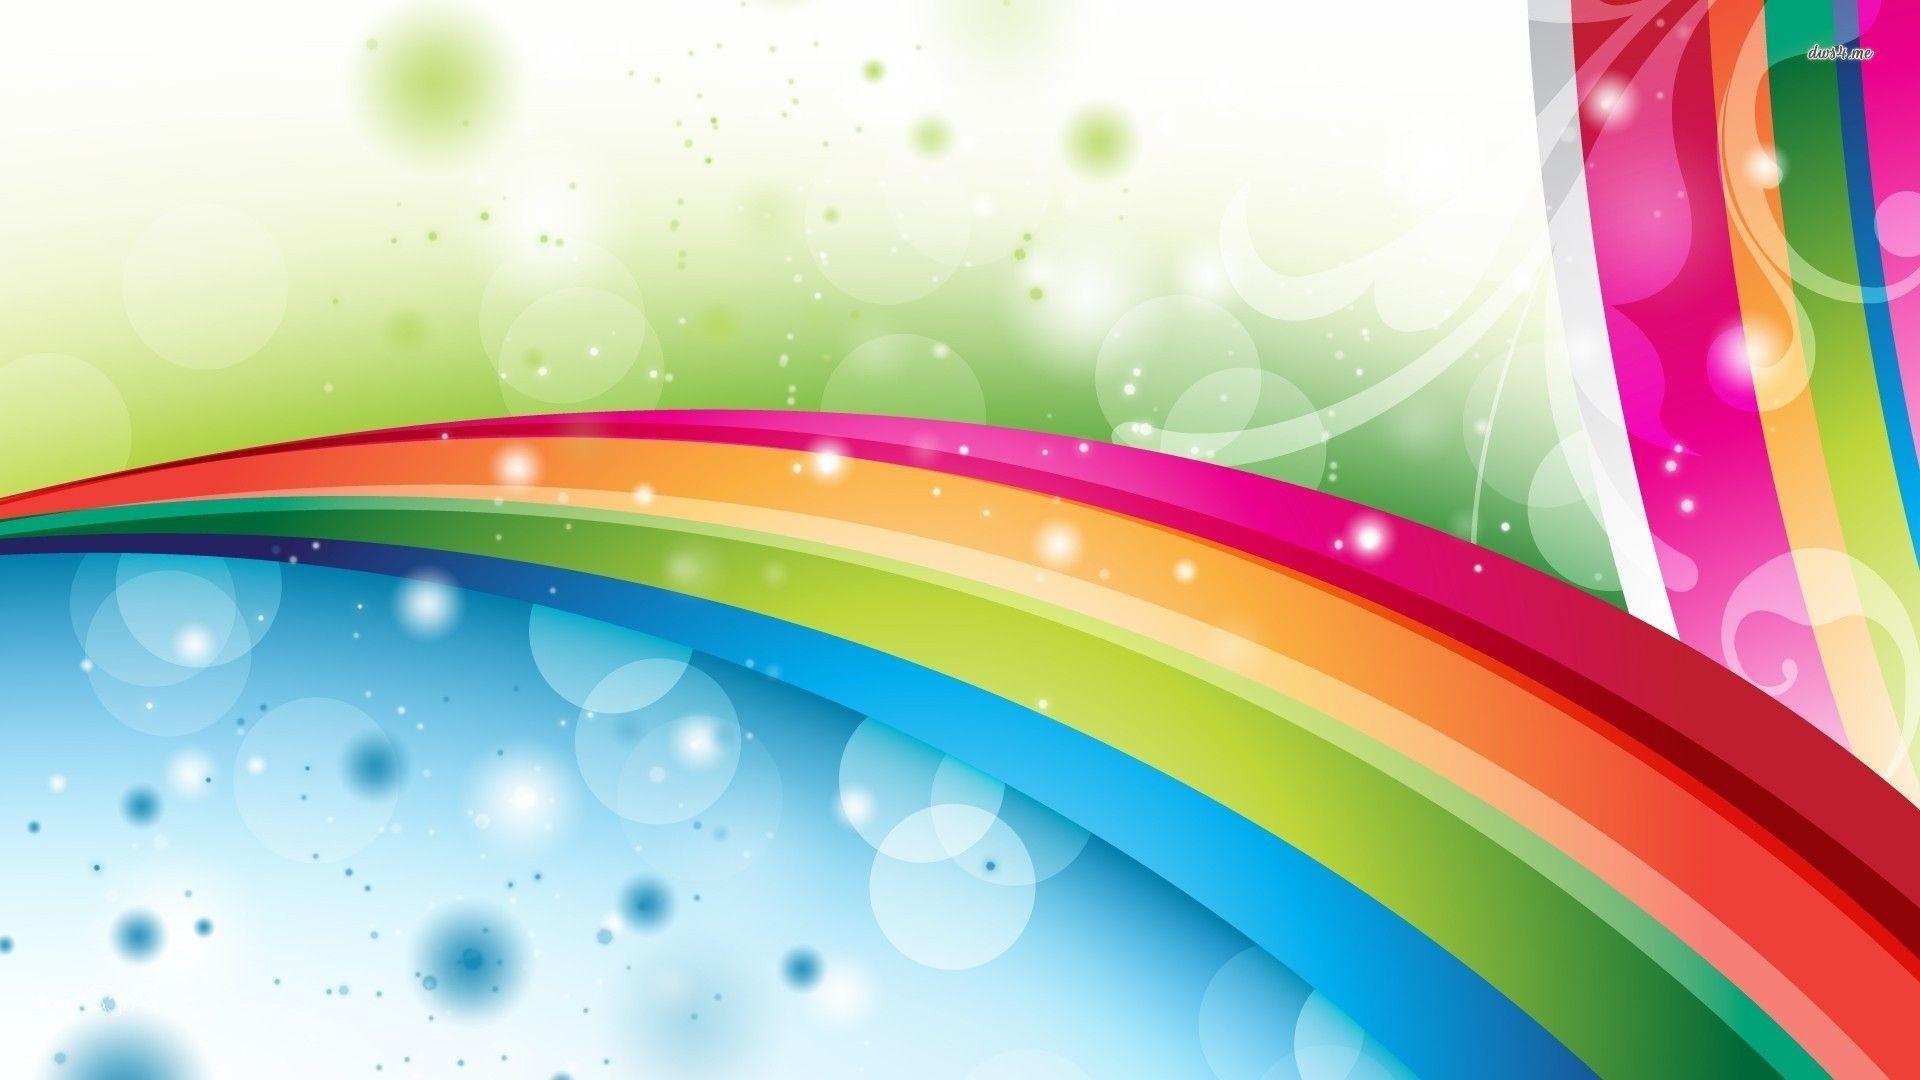 Rainbow Colors Desktop Backgrounds With Resolution 1920X1080 pixel. You can make this wallpaper for your Desktop Computer Backgrounds, Mac Wallpapers, Android Lock screen or iPhone Screensavers